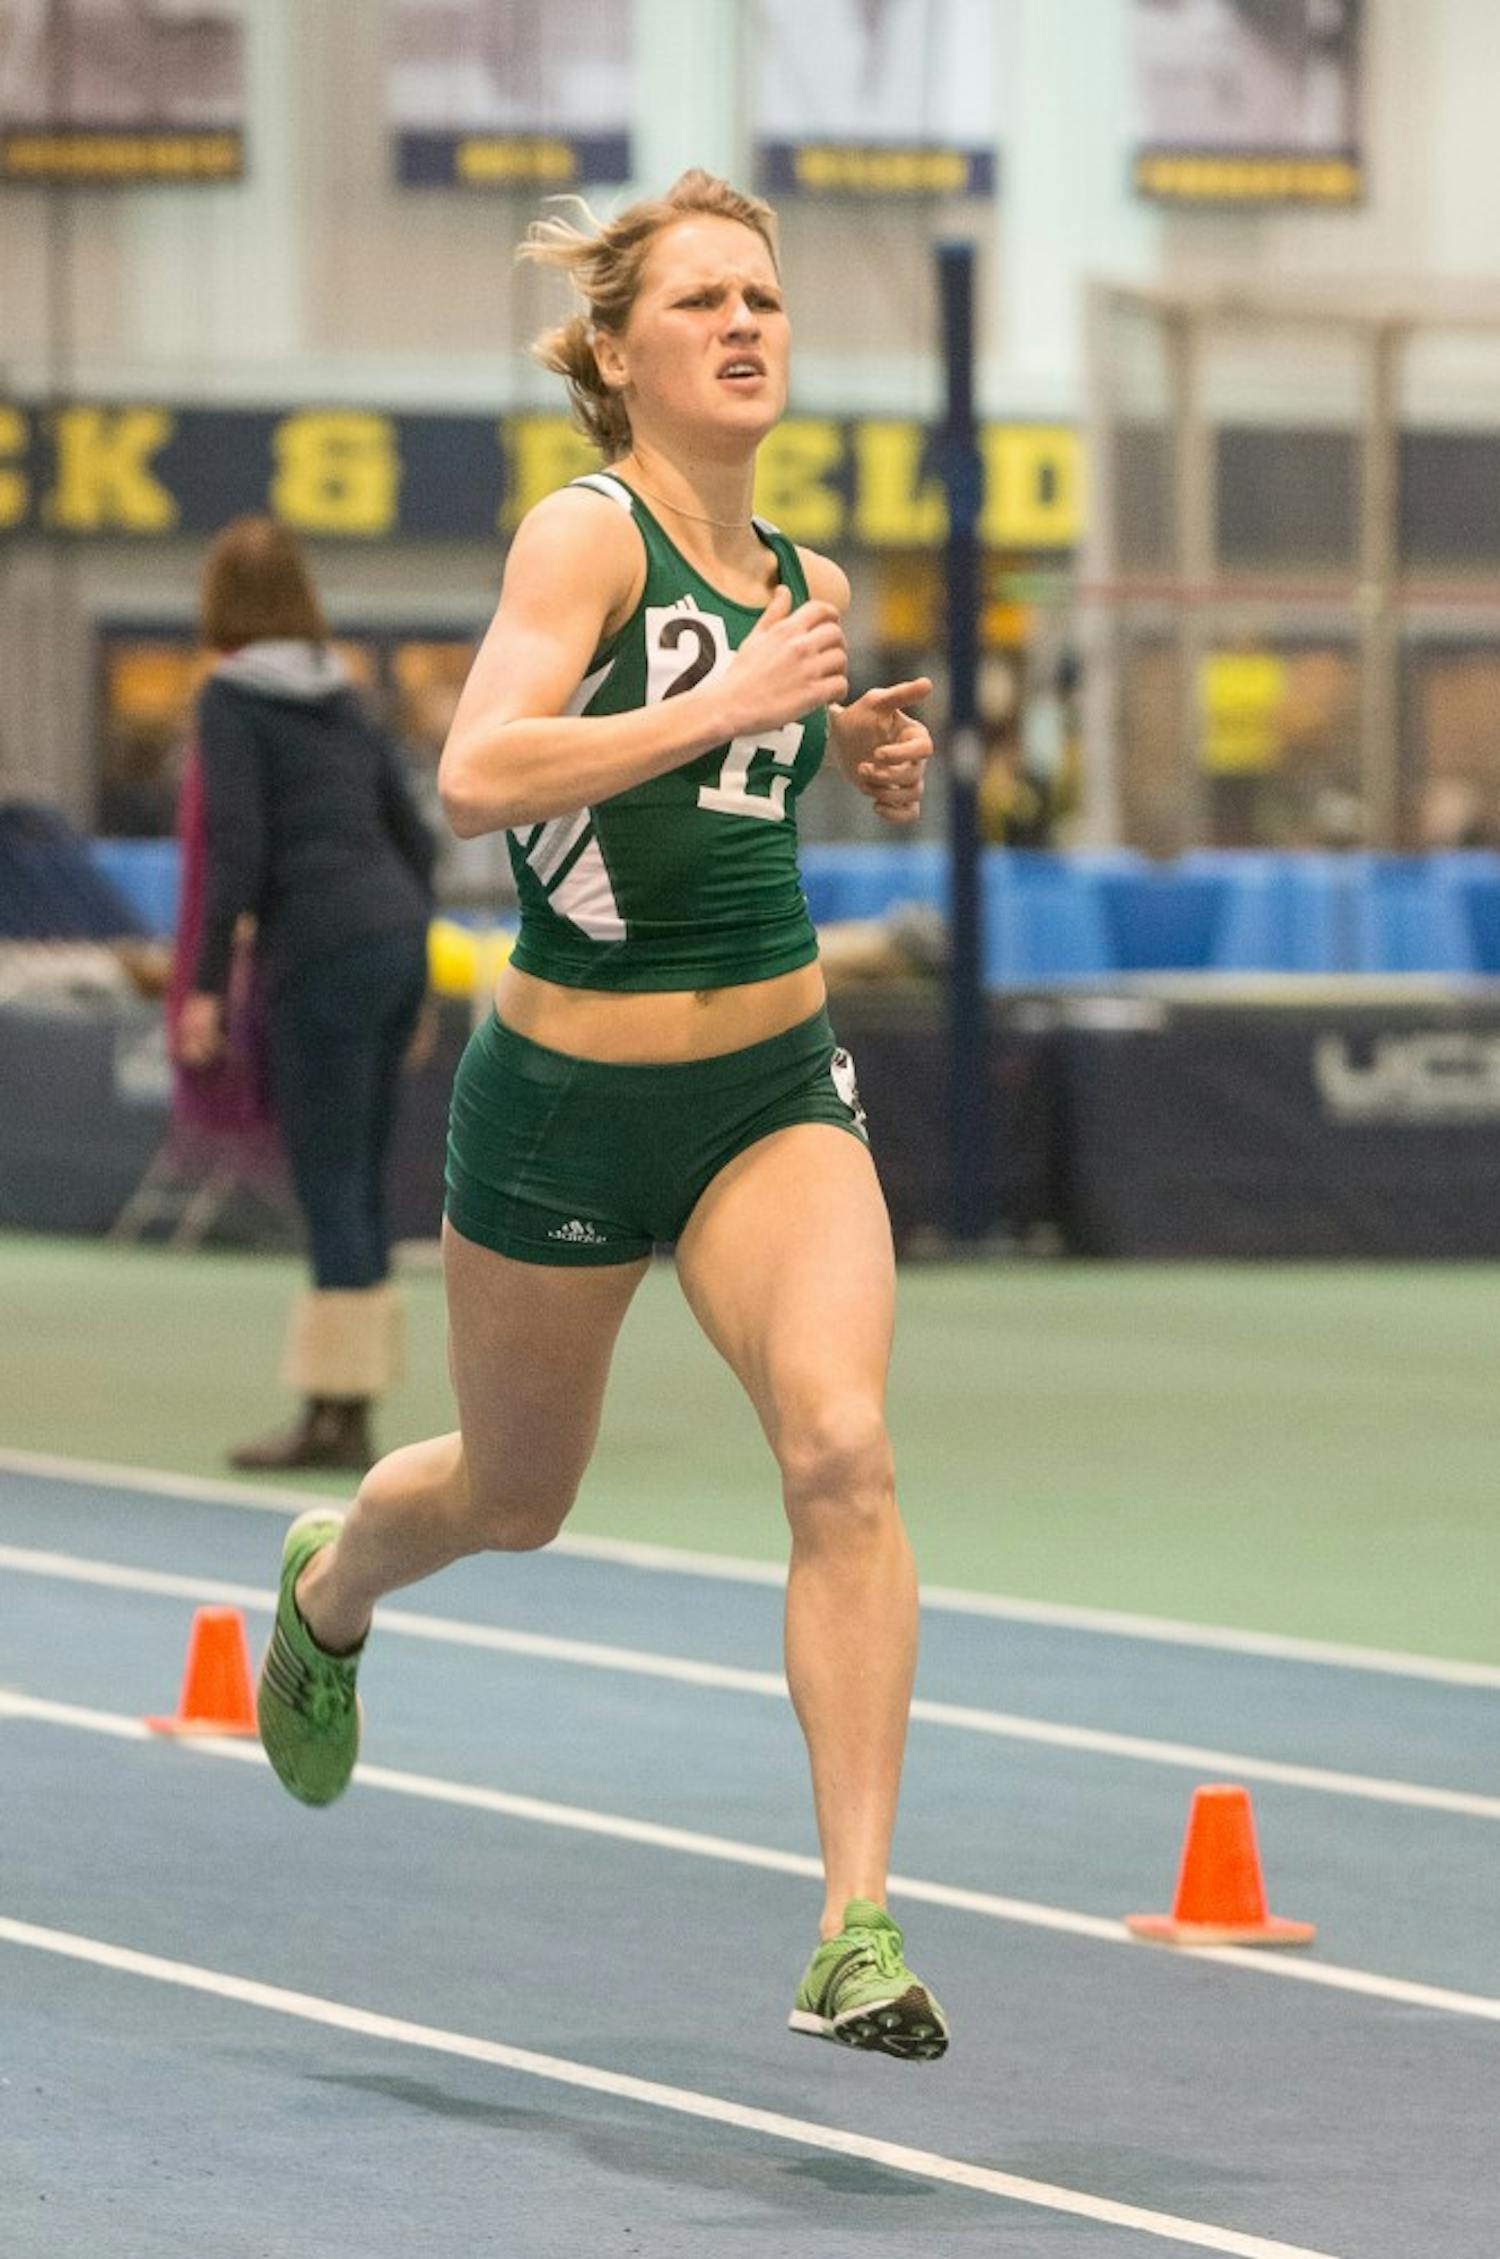 Eastern Michigan distance runner Victoria Voronko sprinting into the finish during the 3000m run on 18 January at the Simmons-Harvey Invitational in Ann Arbor.  She finished second with a time of 9:27.76.